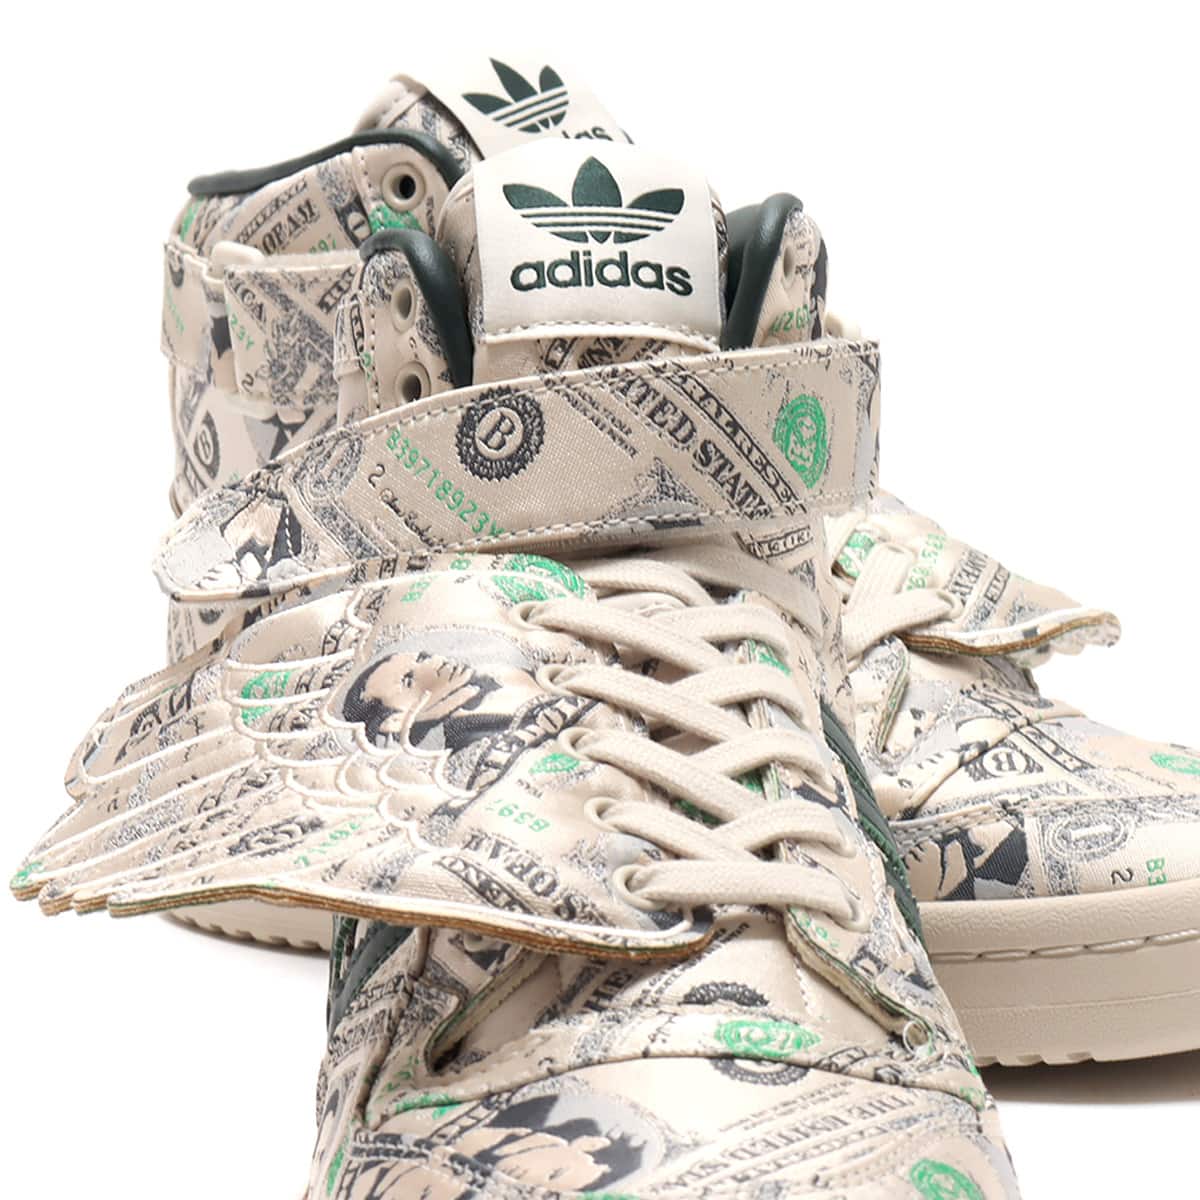 adidas JS FORUM WINGS 1.0 MONEY CLEAR BROWN/GREEN NIGHT/CLEAR ...